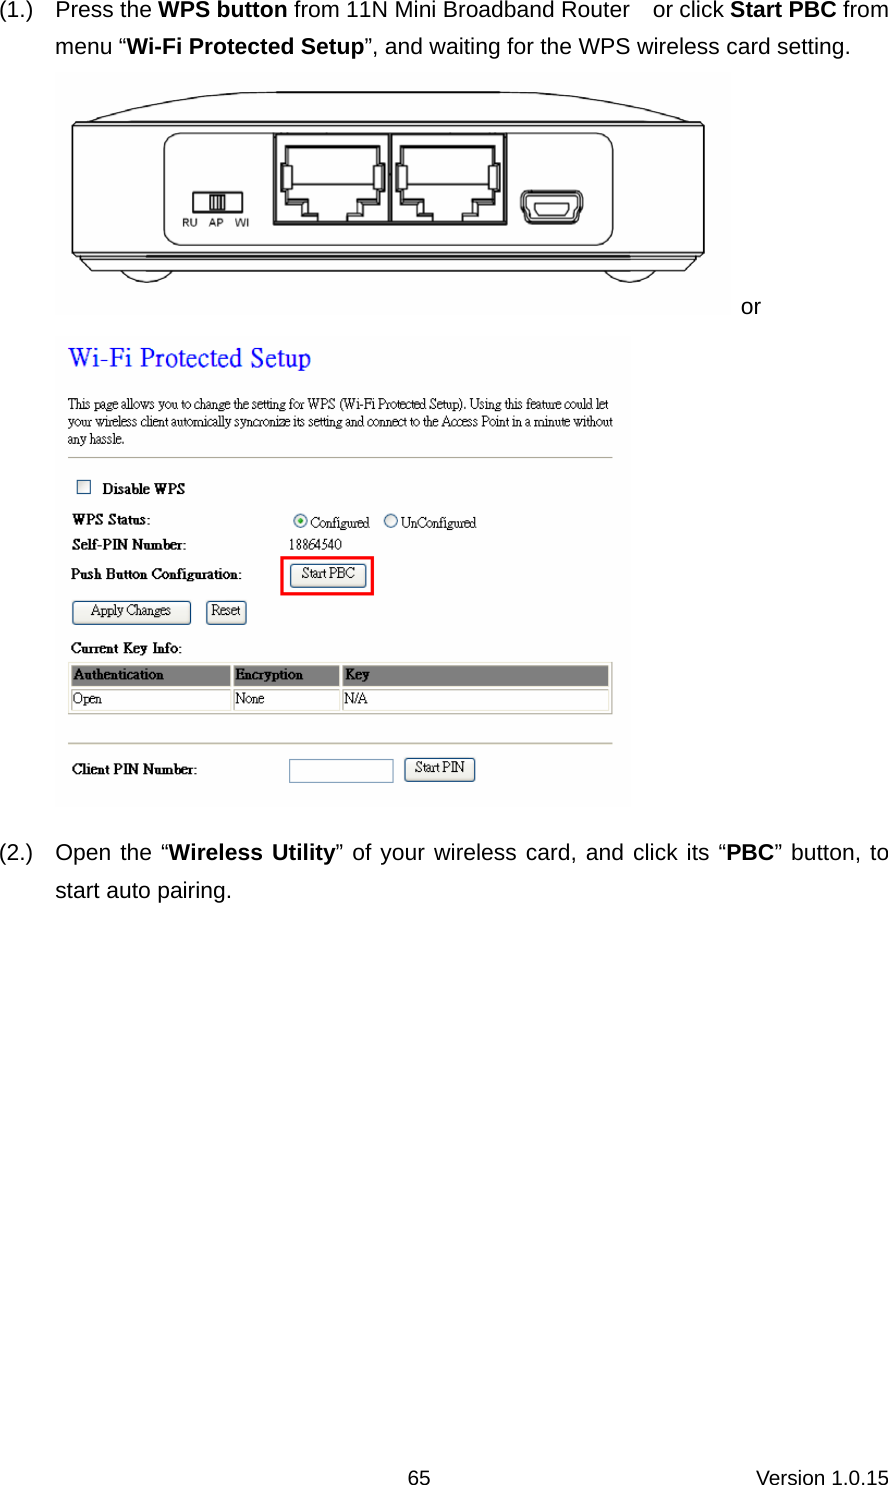 Version 1.0.15 65(1.) Press the WPS button from 11N Mini Broadband Router    or click Start PBC from menu “Wi-Fi Protected Setup”, and waiting for the WPS wireless card setting.    or  (2.)  Open the “Wireless Utility” of your wireless card, and click its “PBC” button, to start auto pairing. 